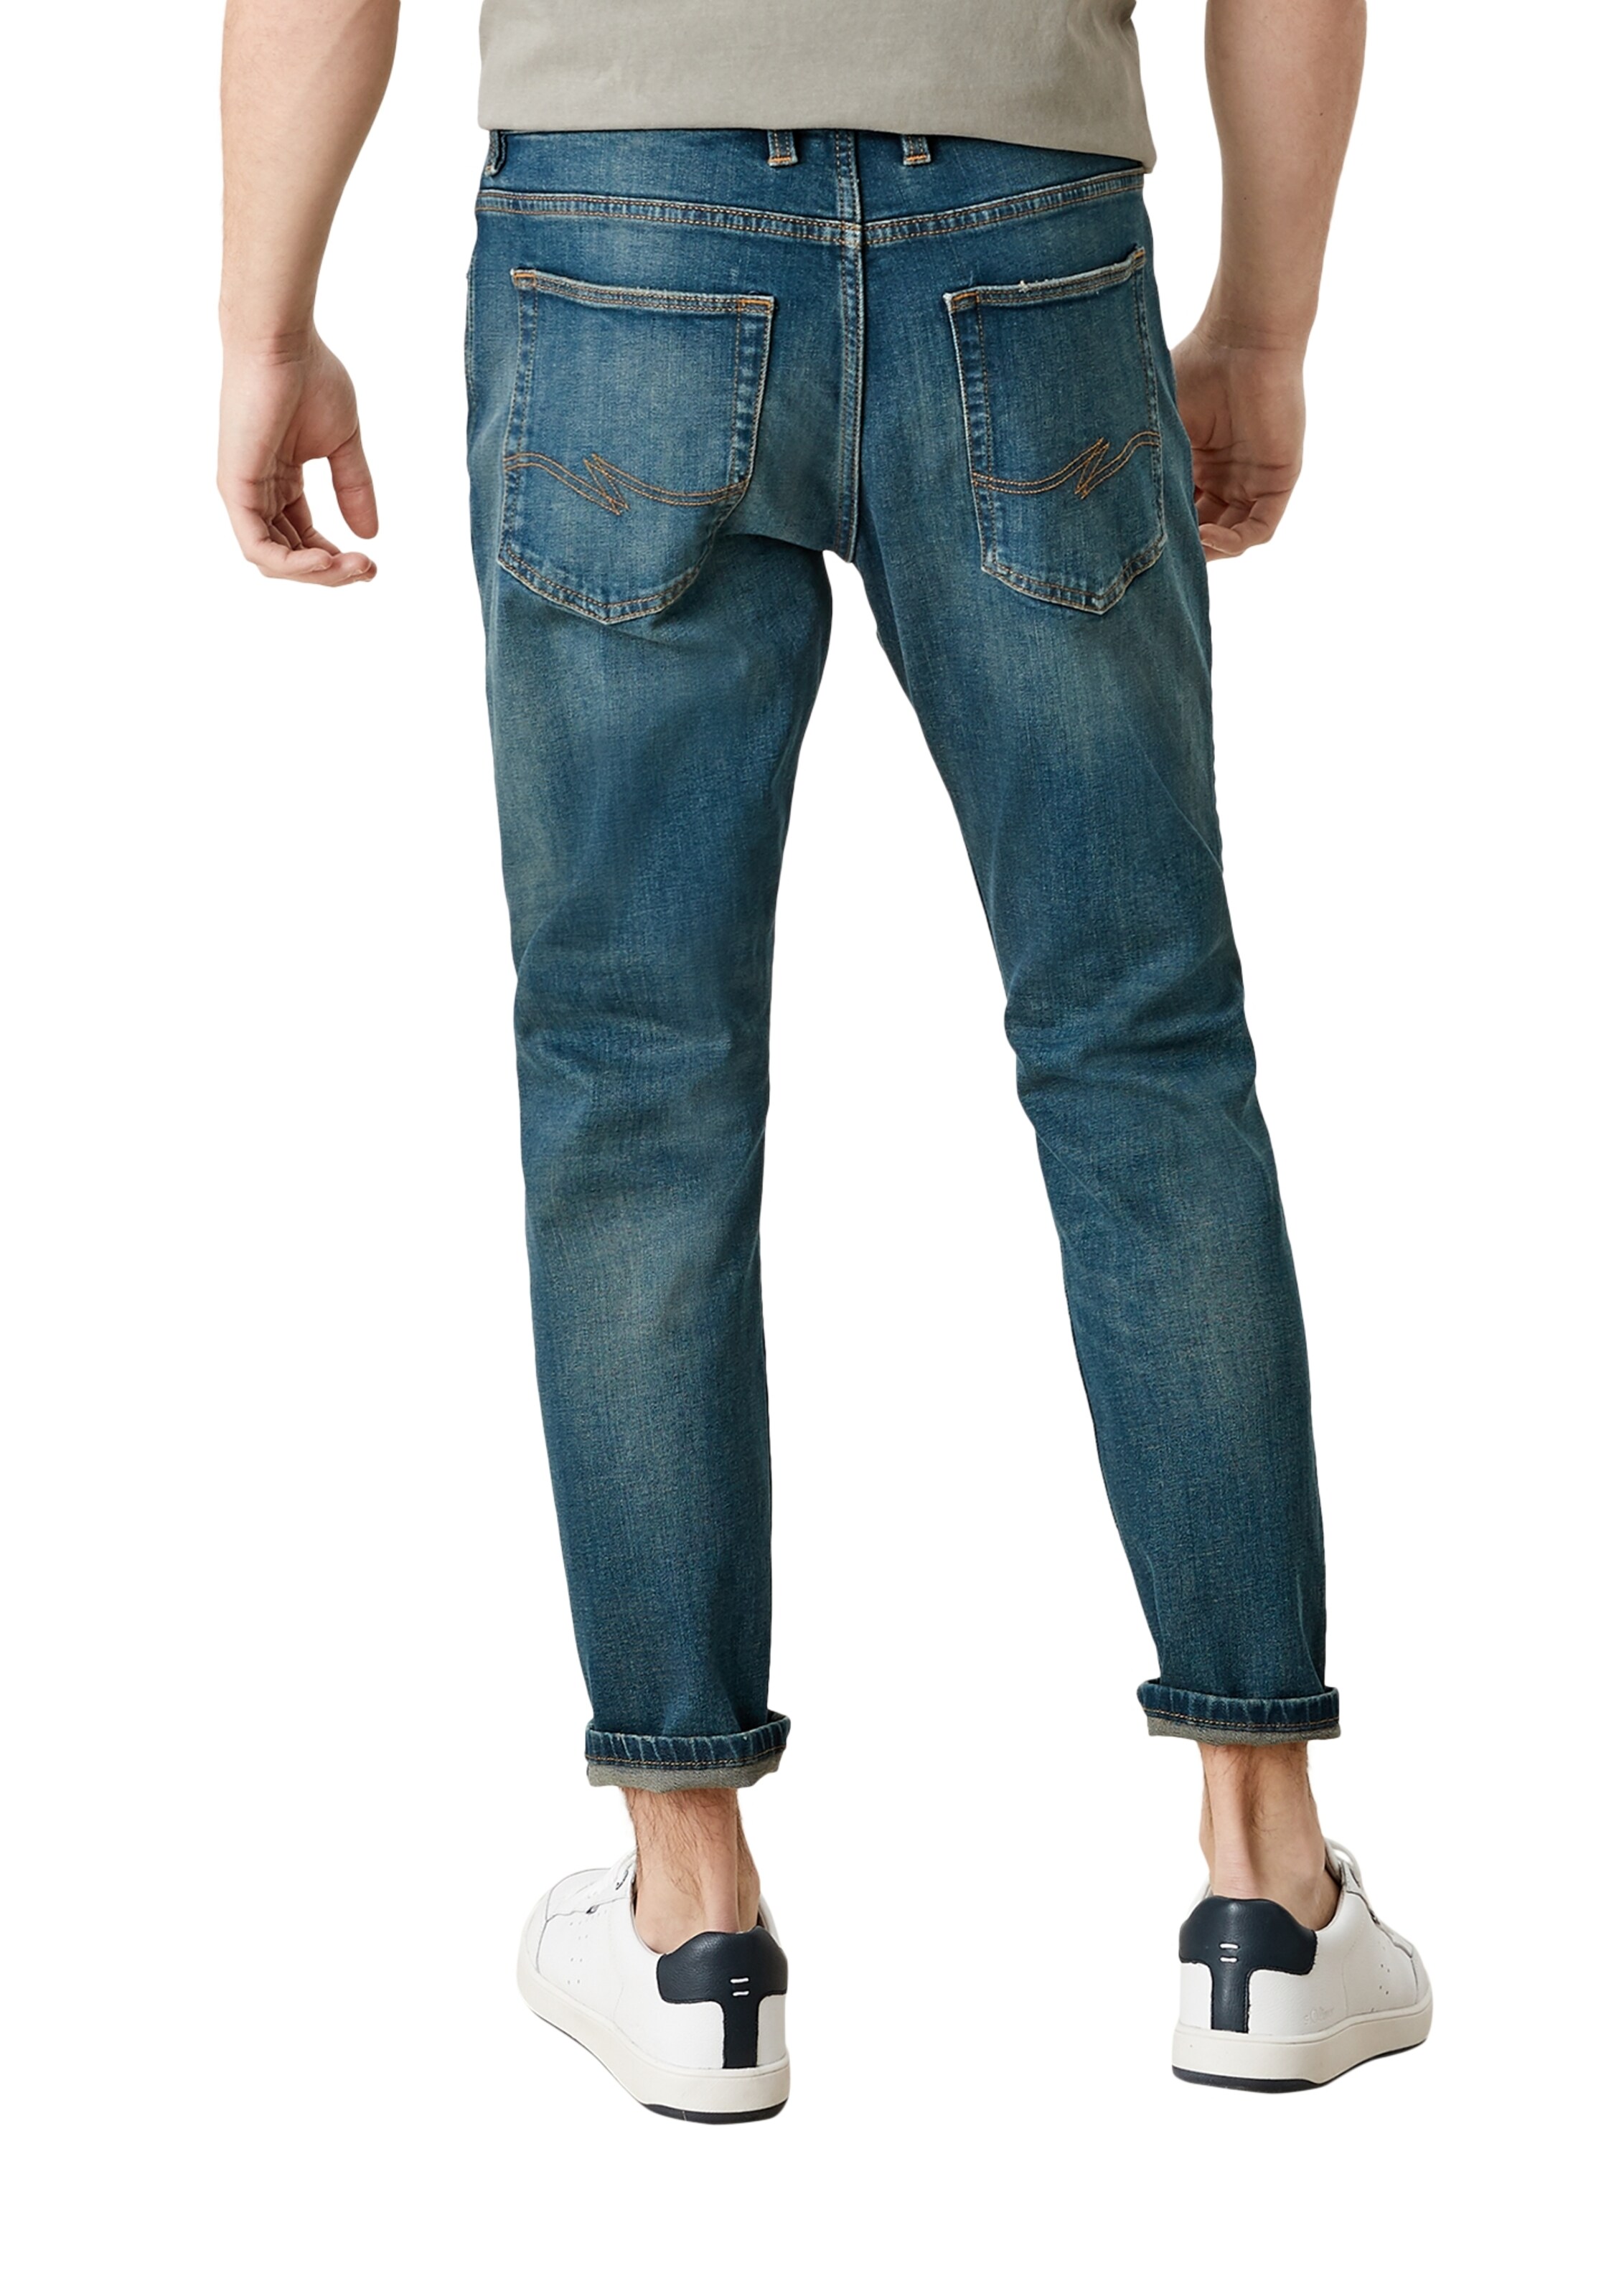 Männer Jeans QS by s.Oliver Jeans in Blau - SJ42821